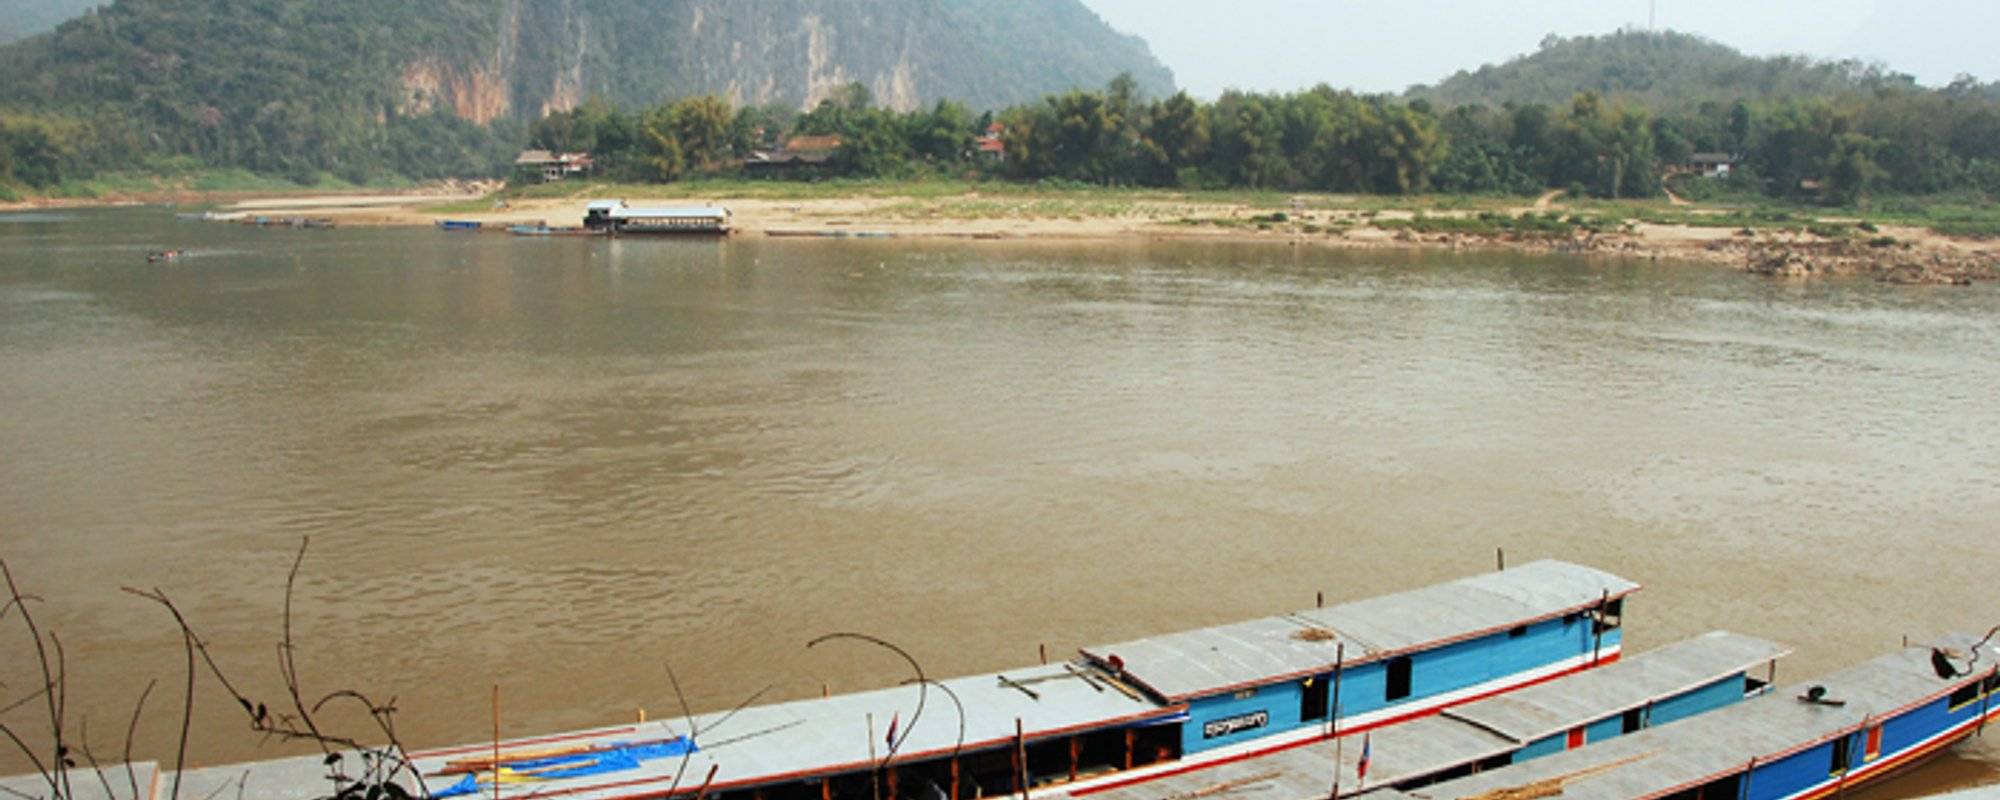 LAOS - A day on the Mekong river